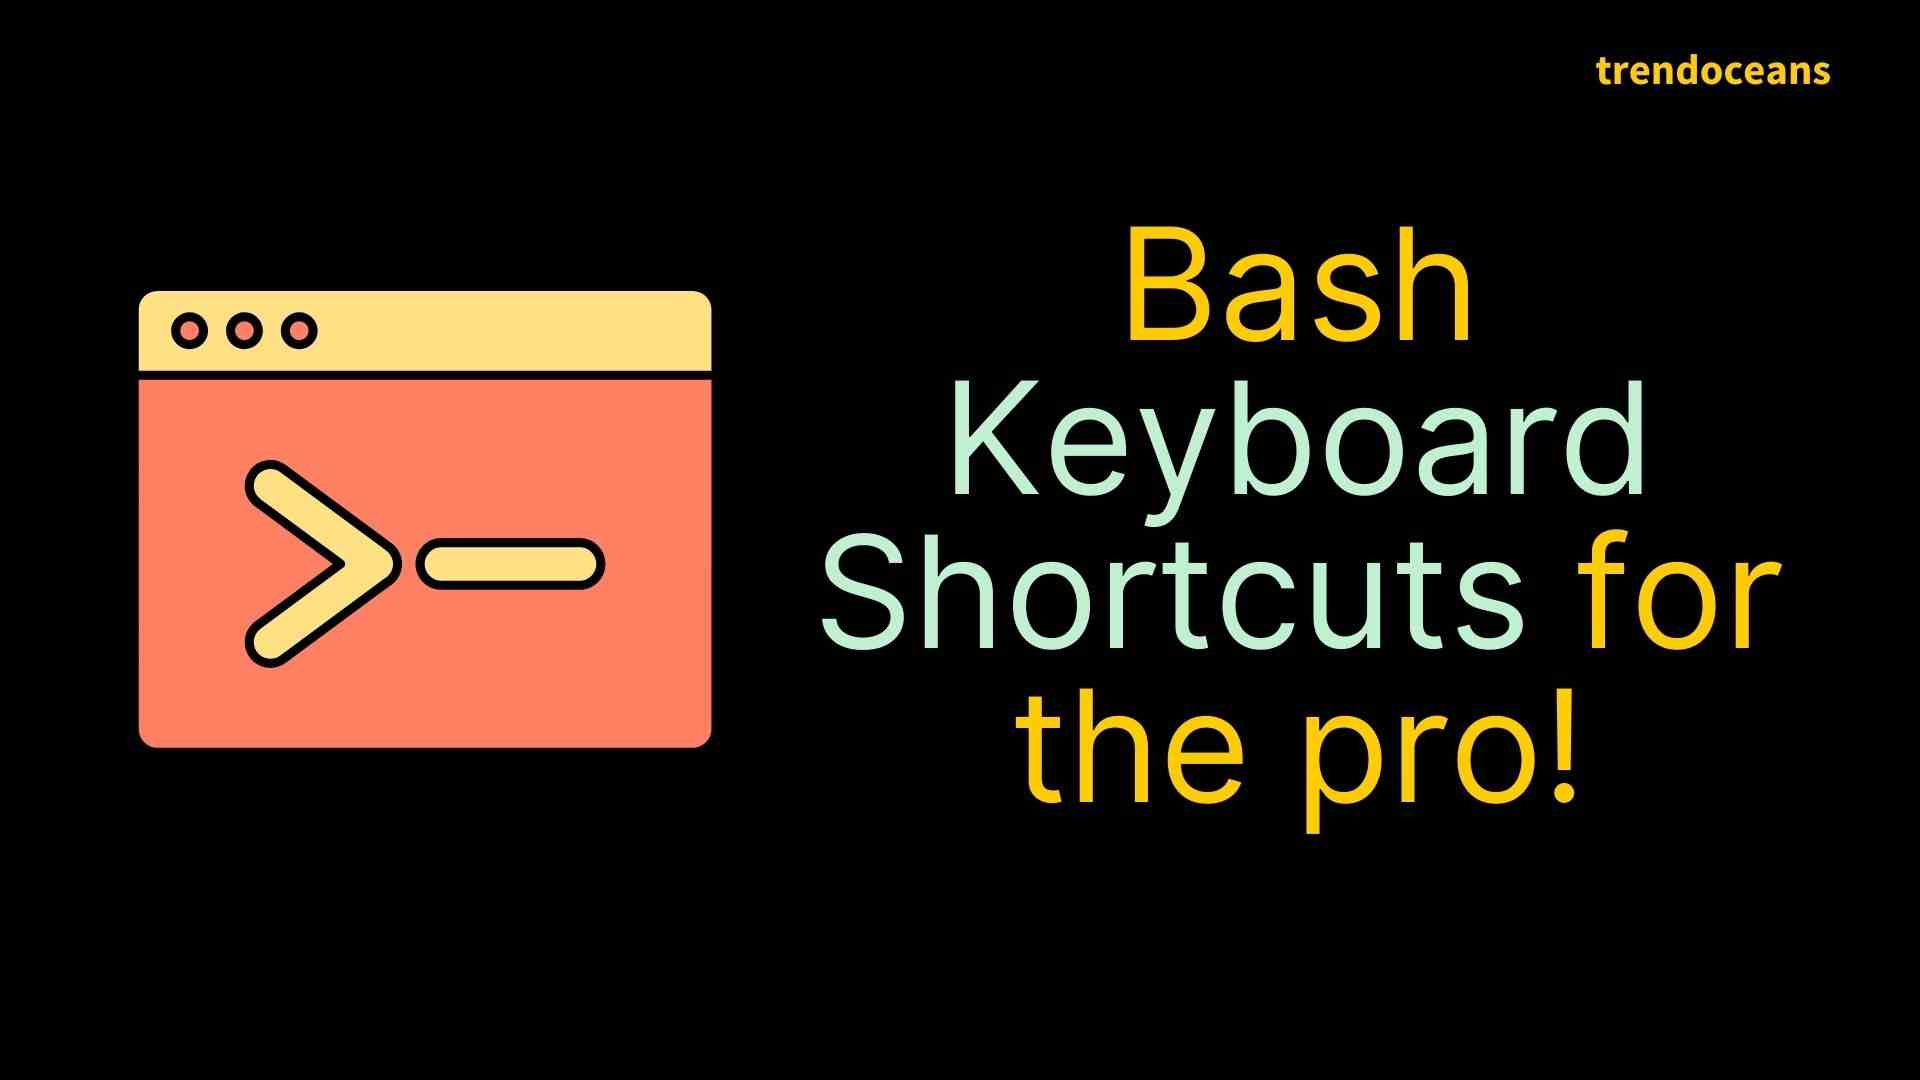 Bash Keyboard Shortcuts for the pro! - TREND OCEANS